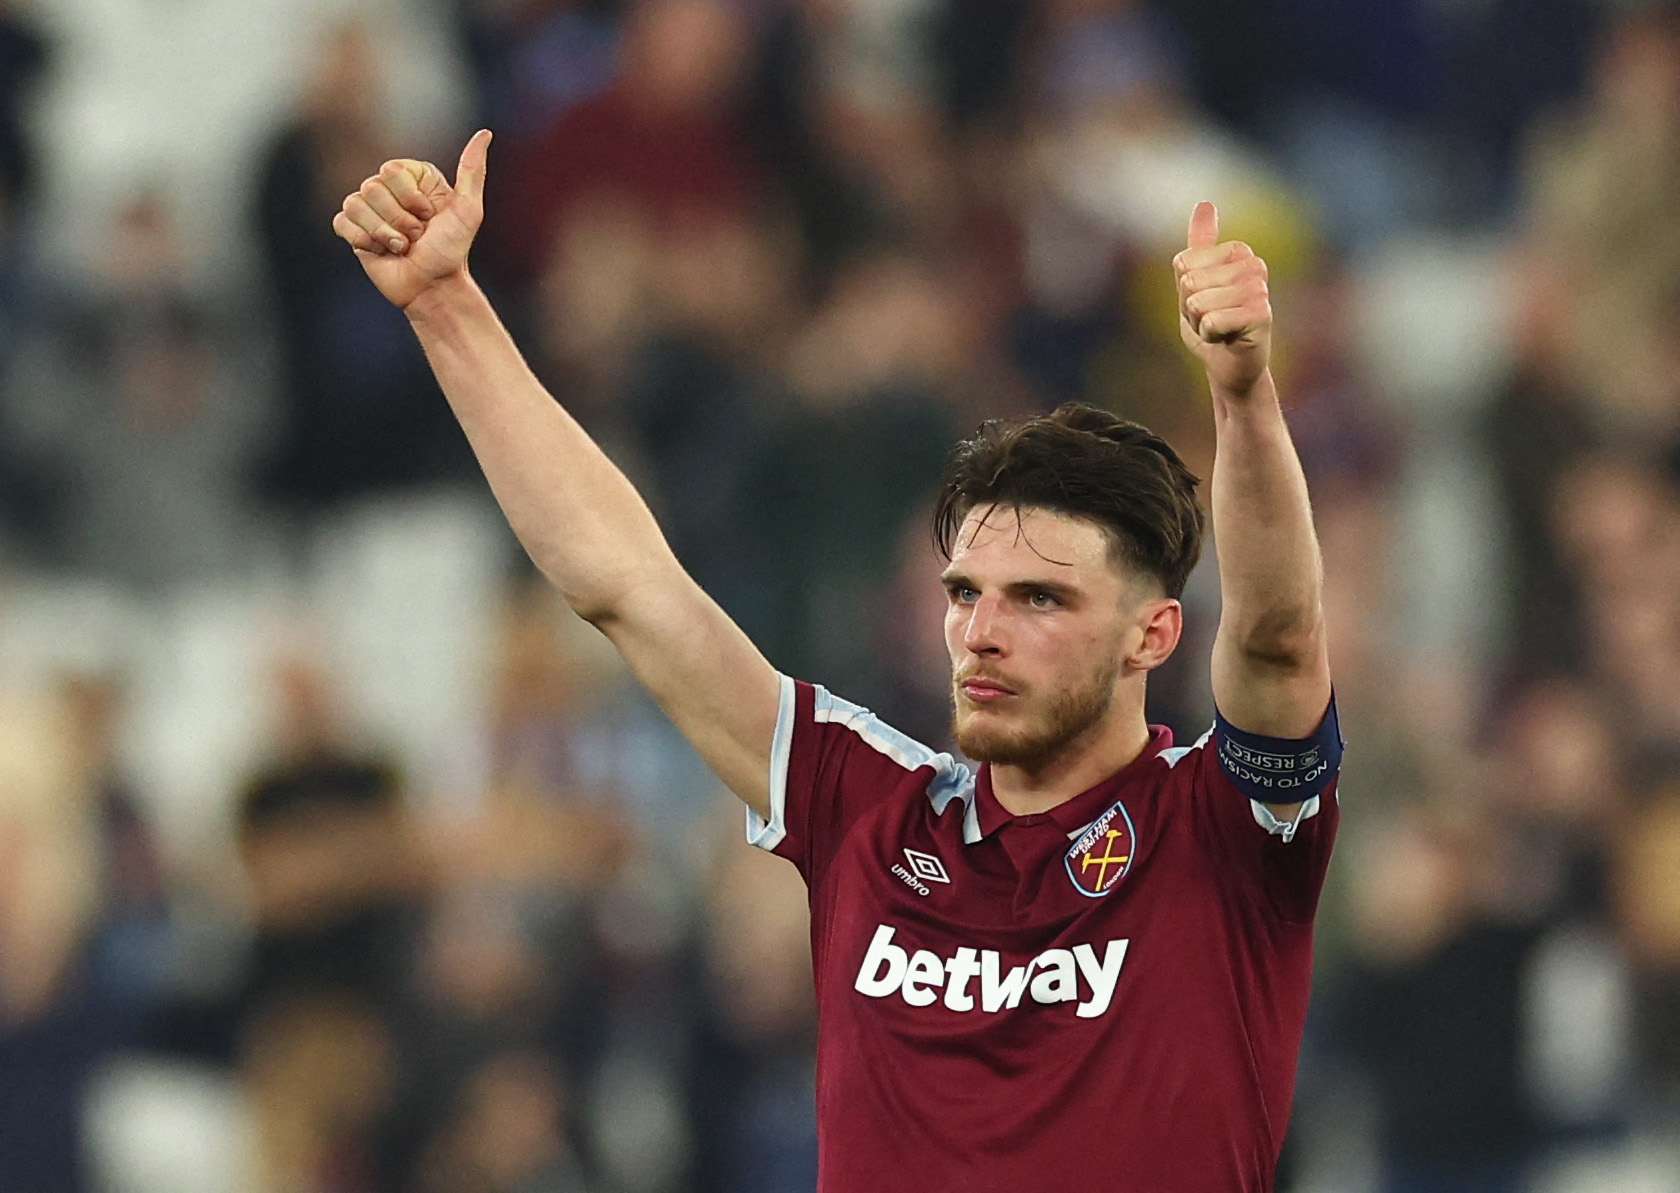 West Ham United's Declan Rice reacts after the match